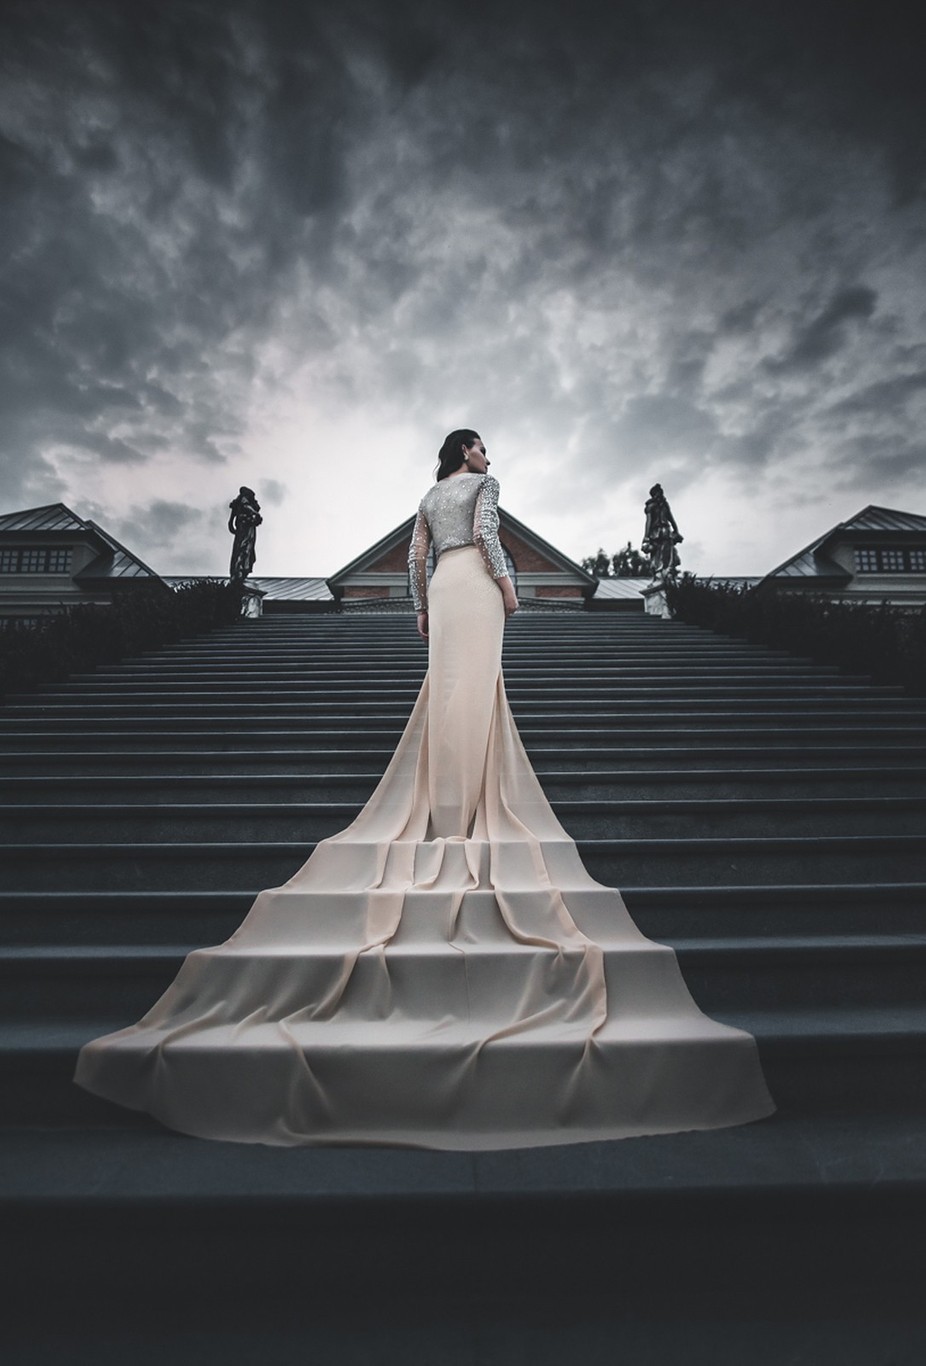 To the Top by LaimaKavaliauskaite - Elegance And Luxury Photo Contest